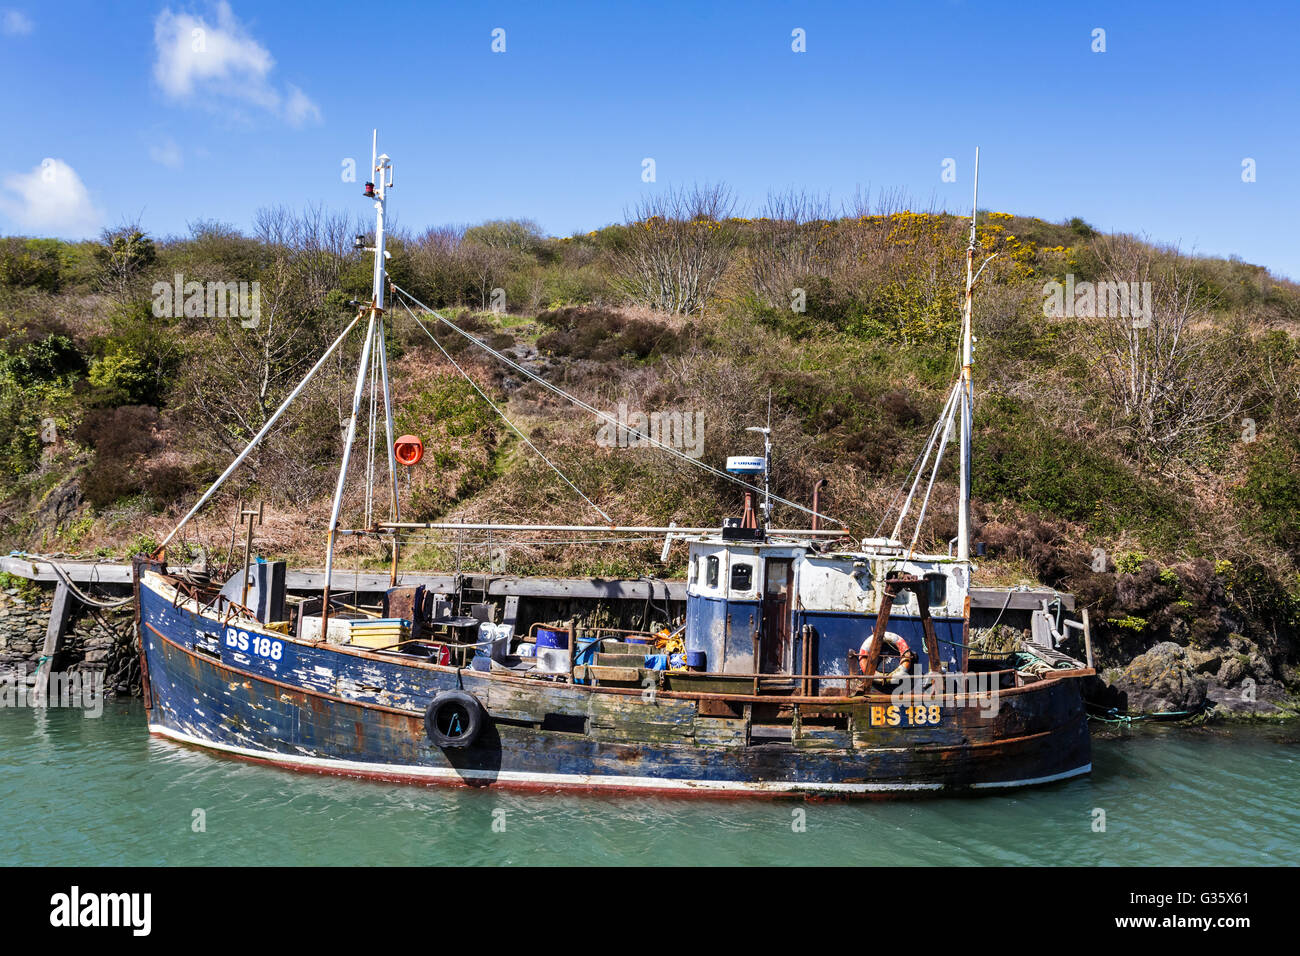 BS 188 Fishing Boat, Amlwch Port, Anglesey, North Wales Uk Stock Photo